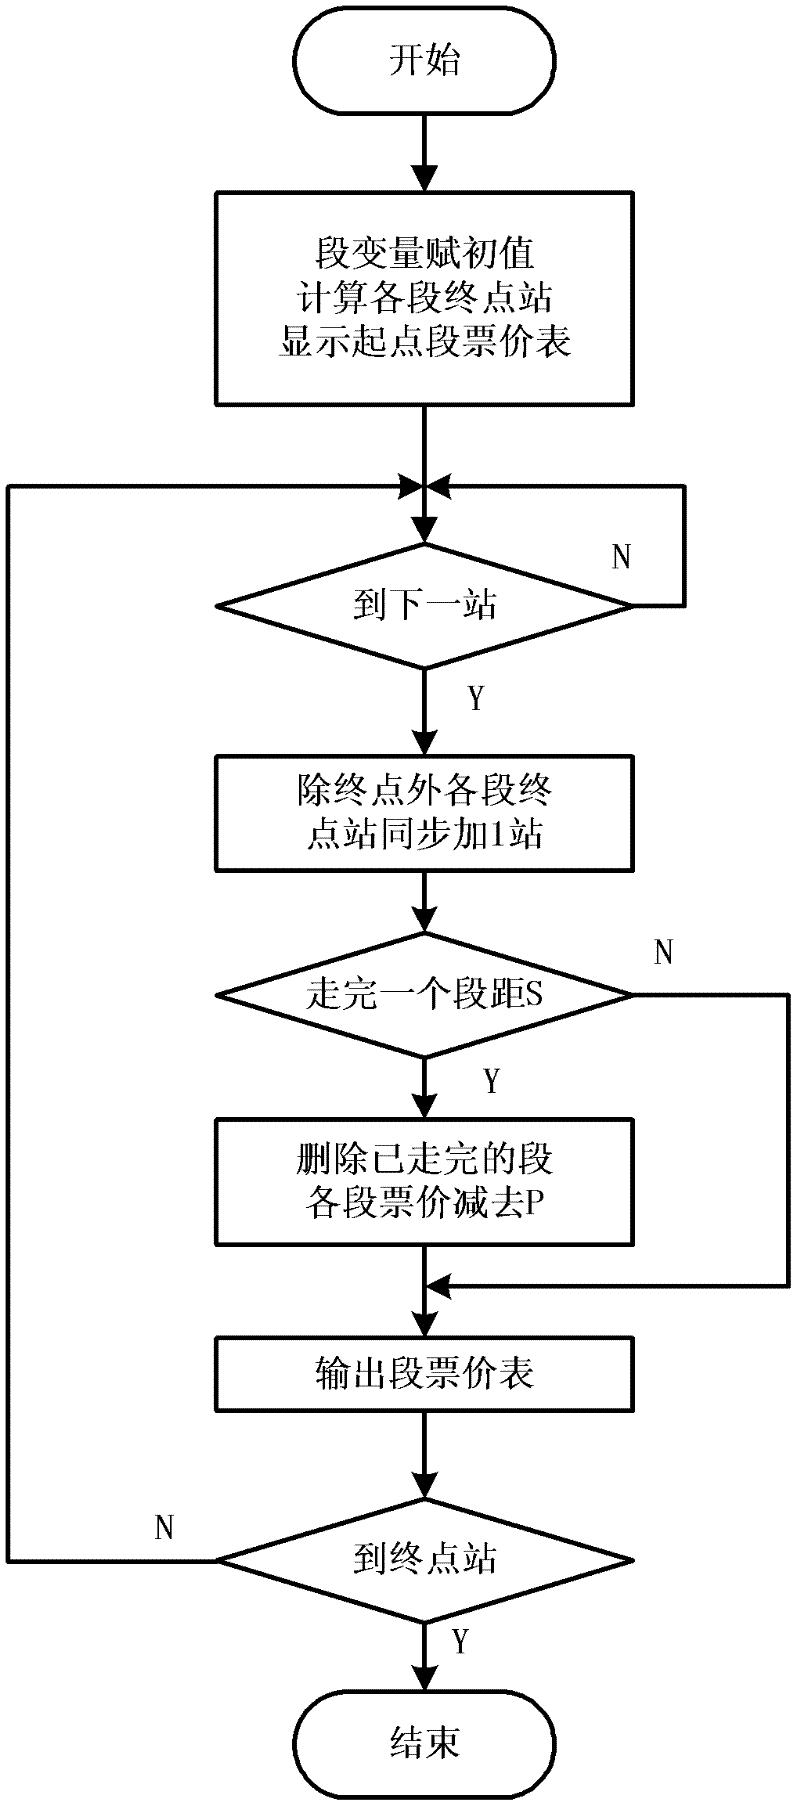 Method for realizing 'dynamic sectional fare' of self-service ticketing bus